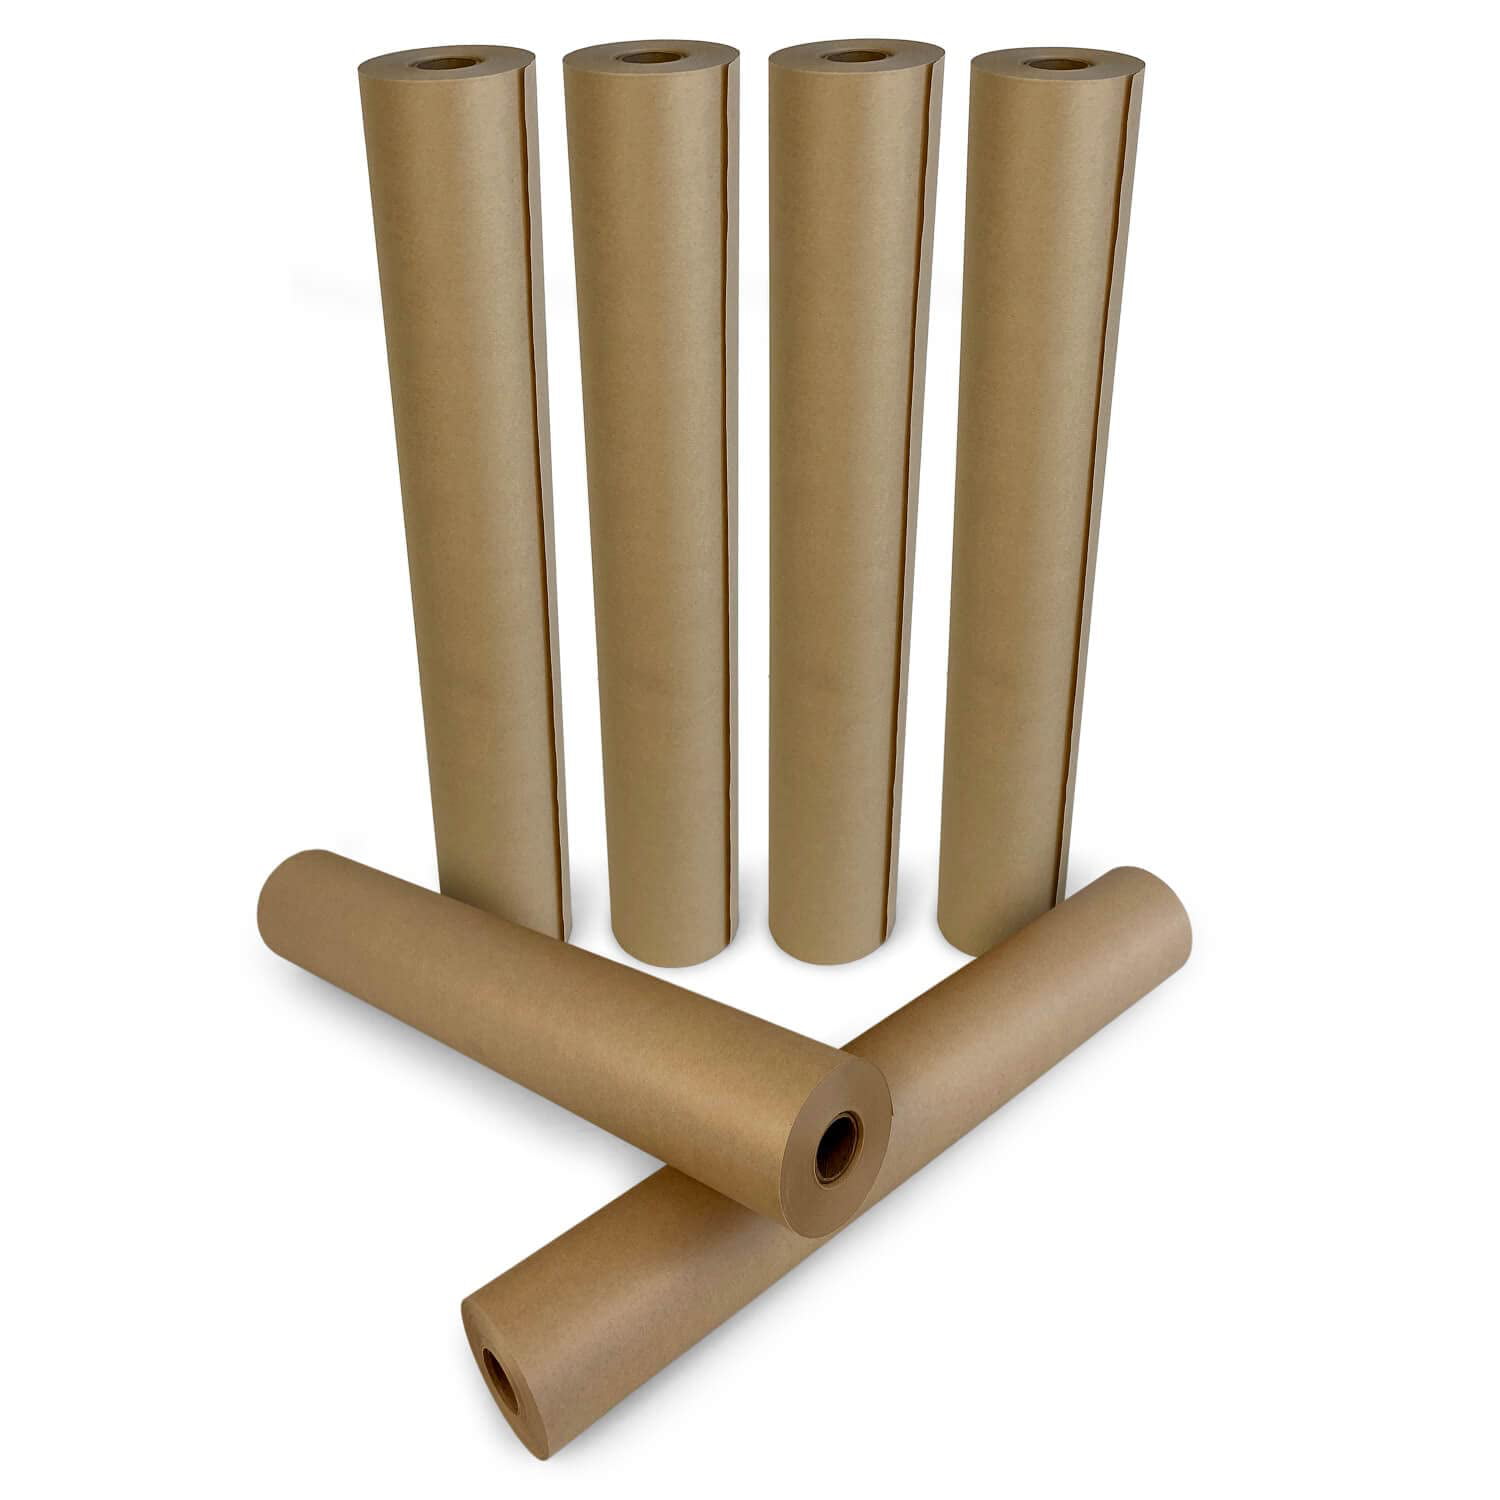 100% Recyclable Natural Kraft Wrapping Paper Moving Brown Kraft Paper Roll Pack of 2 30 lbs - Quality Paper for Packing Crafts IDL Packaging 24 x 180 feet Shipping 2160 inches 